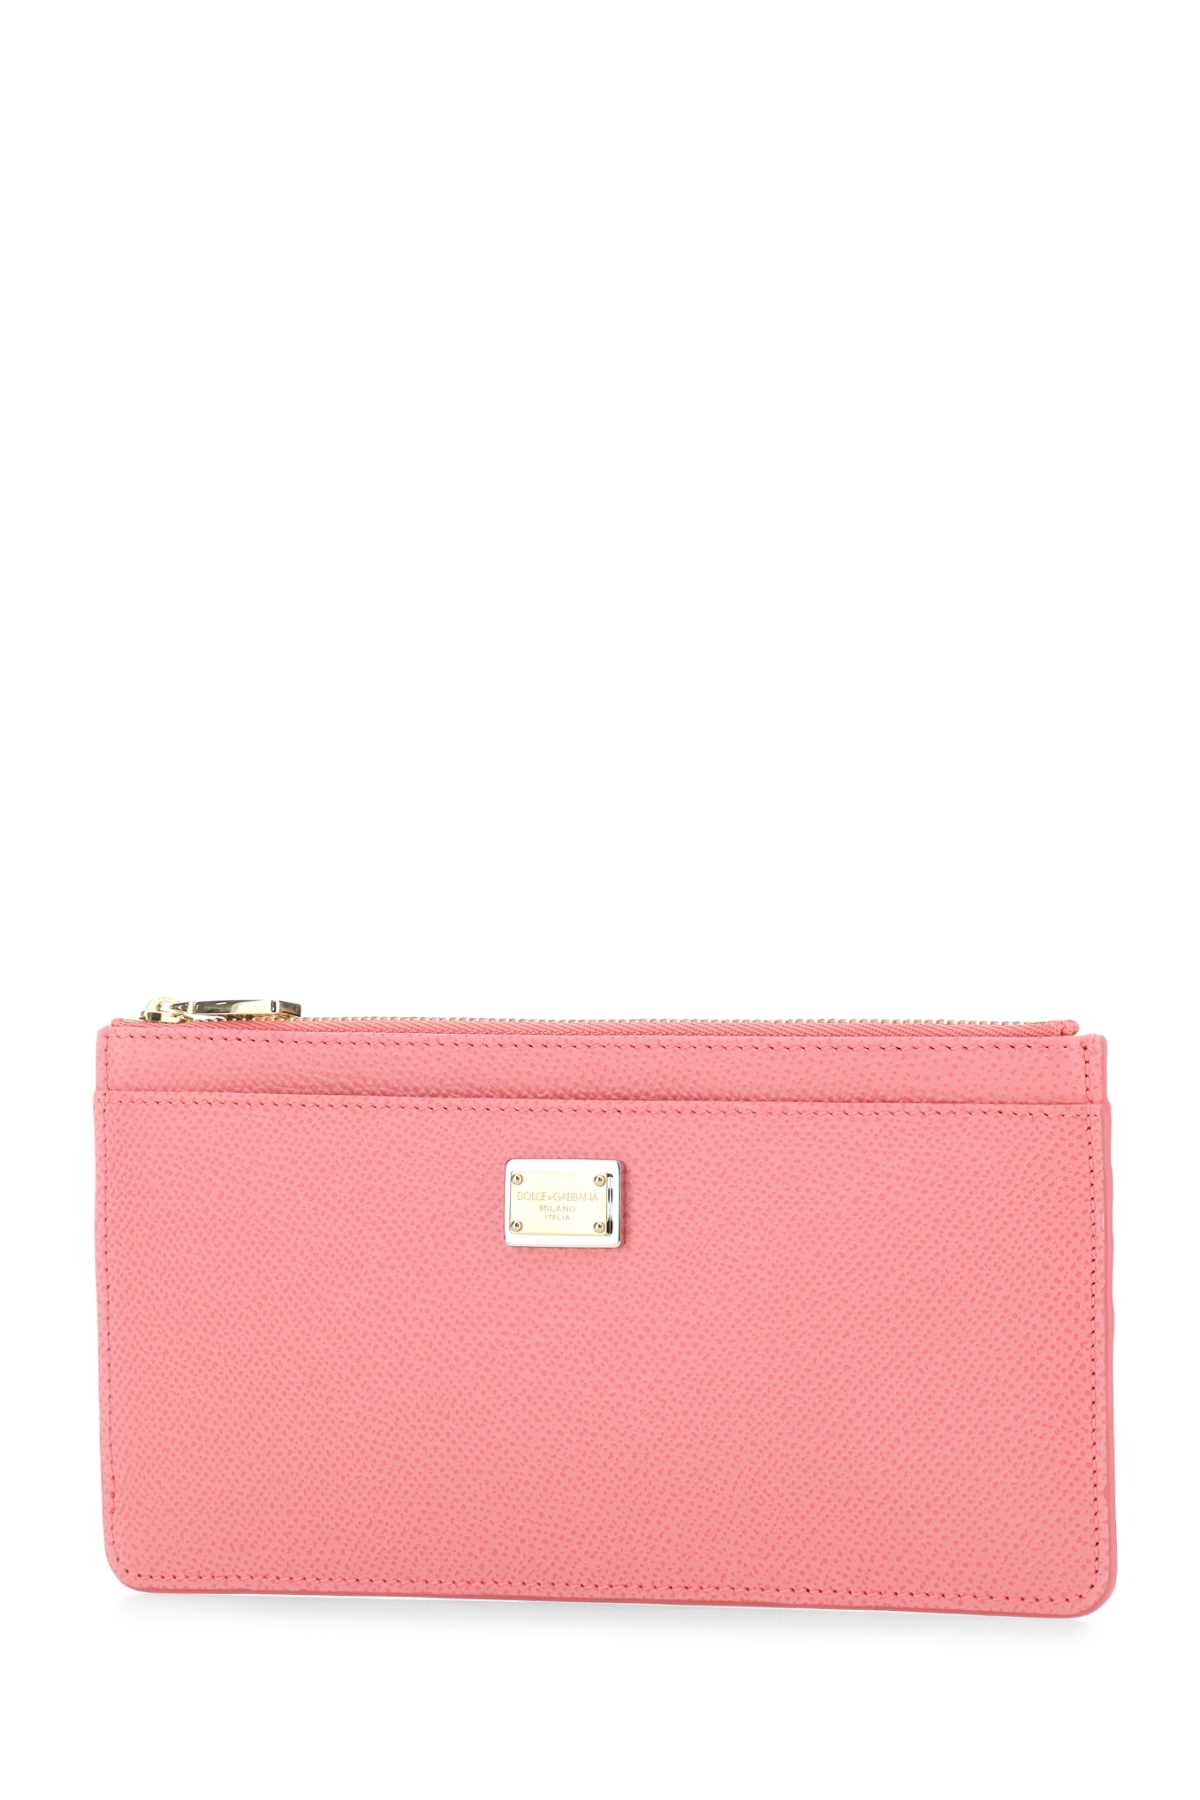 Dolce & Gabbana Pink Leather Card Holder In Purple